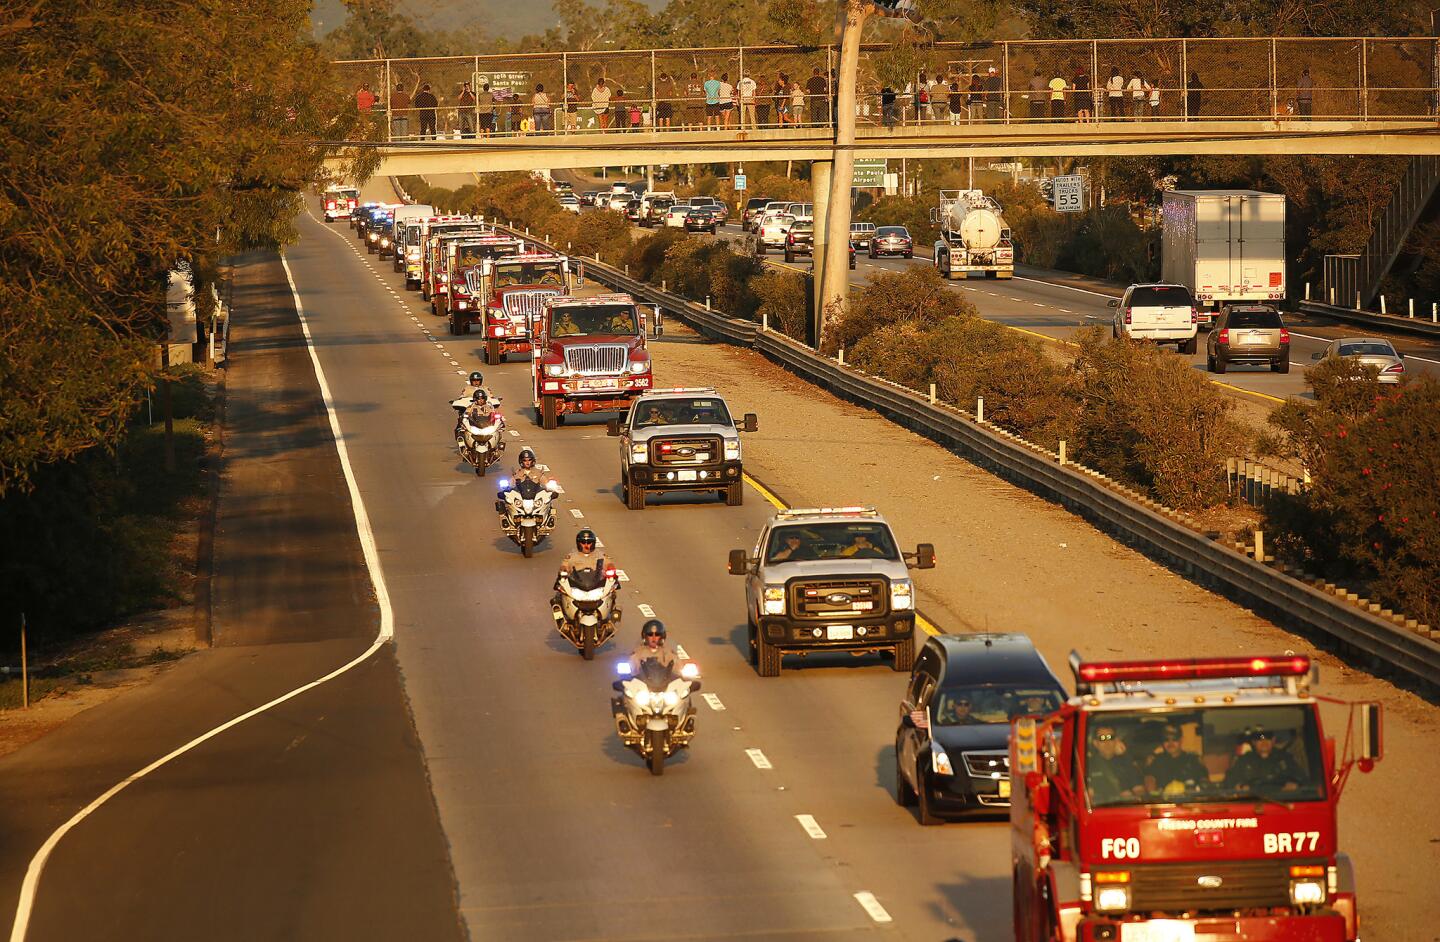 A motorcade proceeds down Highway 126 in Santa Paula carrying the body of firefighter Cory Iverson, 32, who died Thursday morning while battling the Thomas fire outside Fillmore.